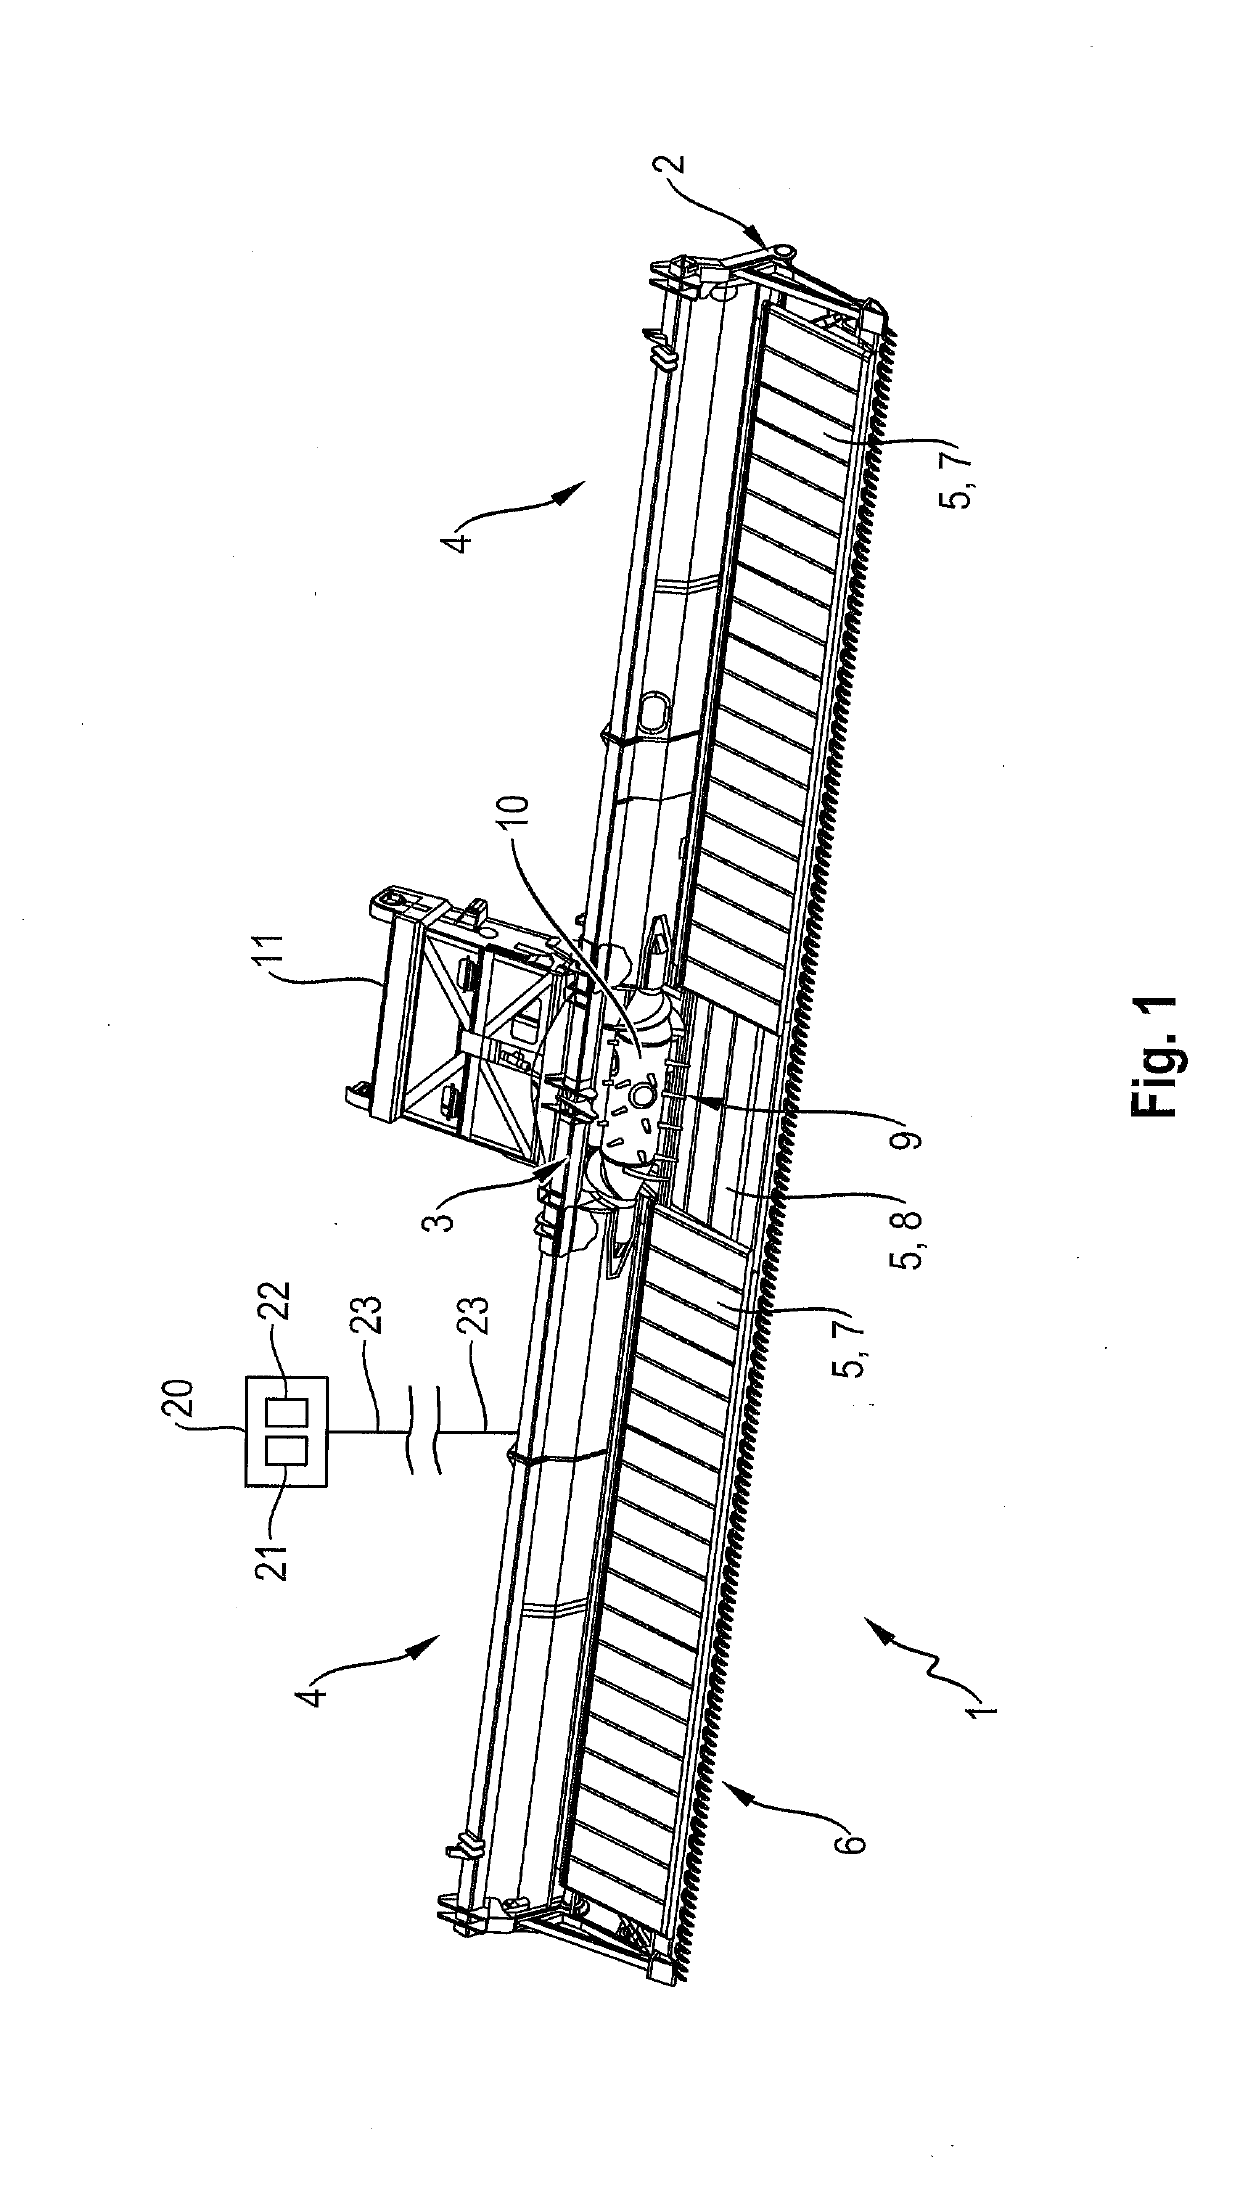 Hight control system for a front harvesting attachment